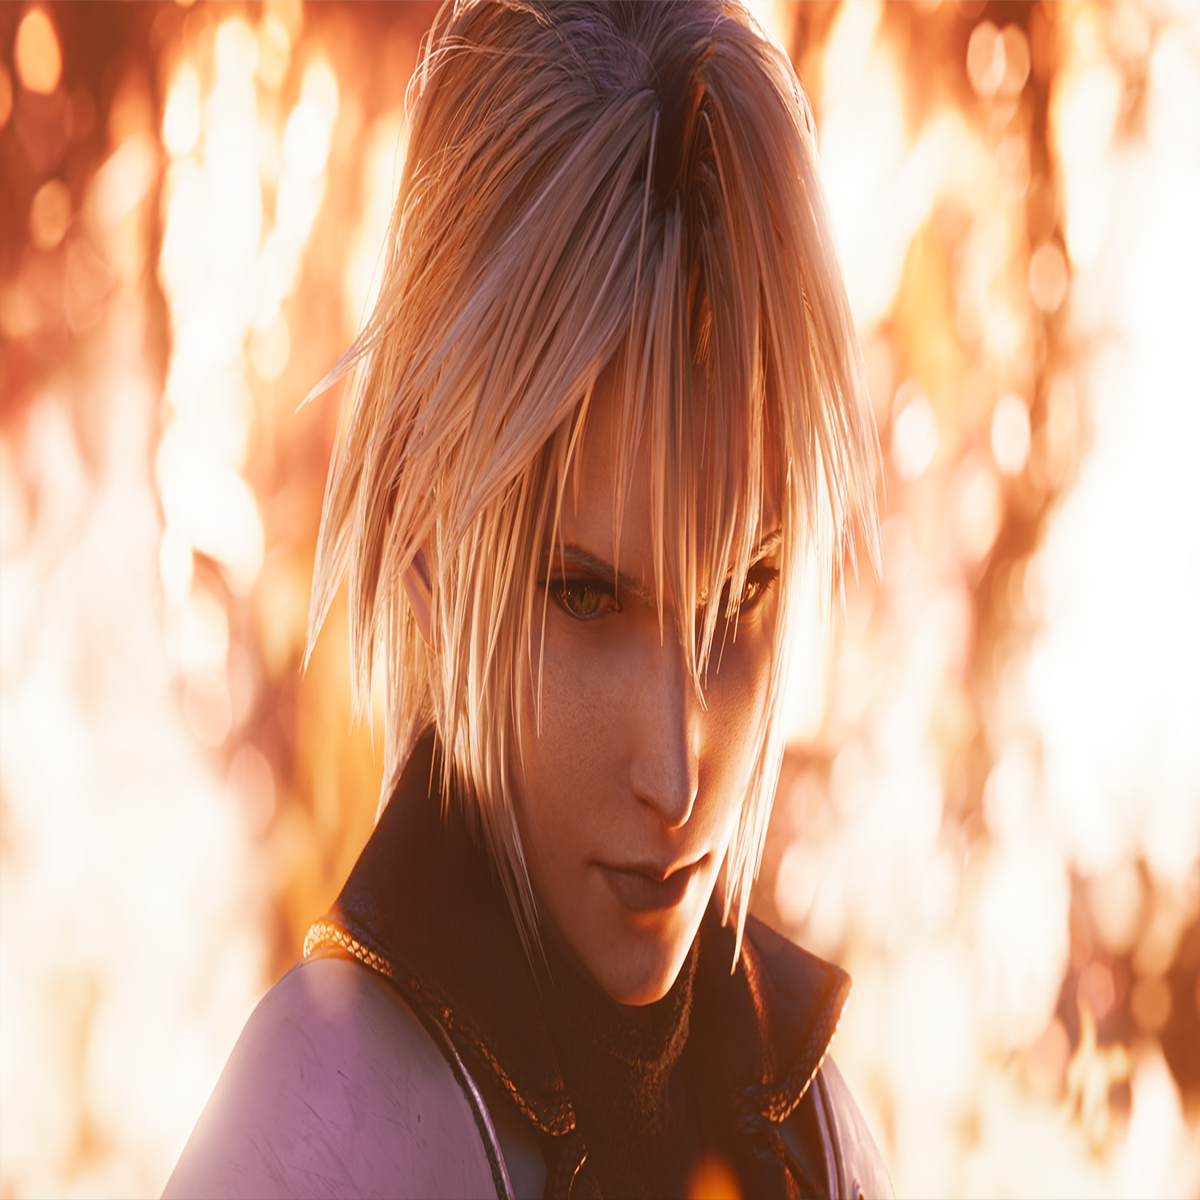 Pseudo-Remake of Final Fantasy 7 Launches in September (iOS & Android)